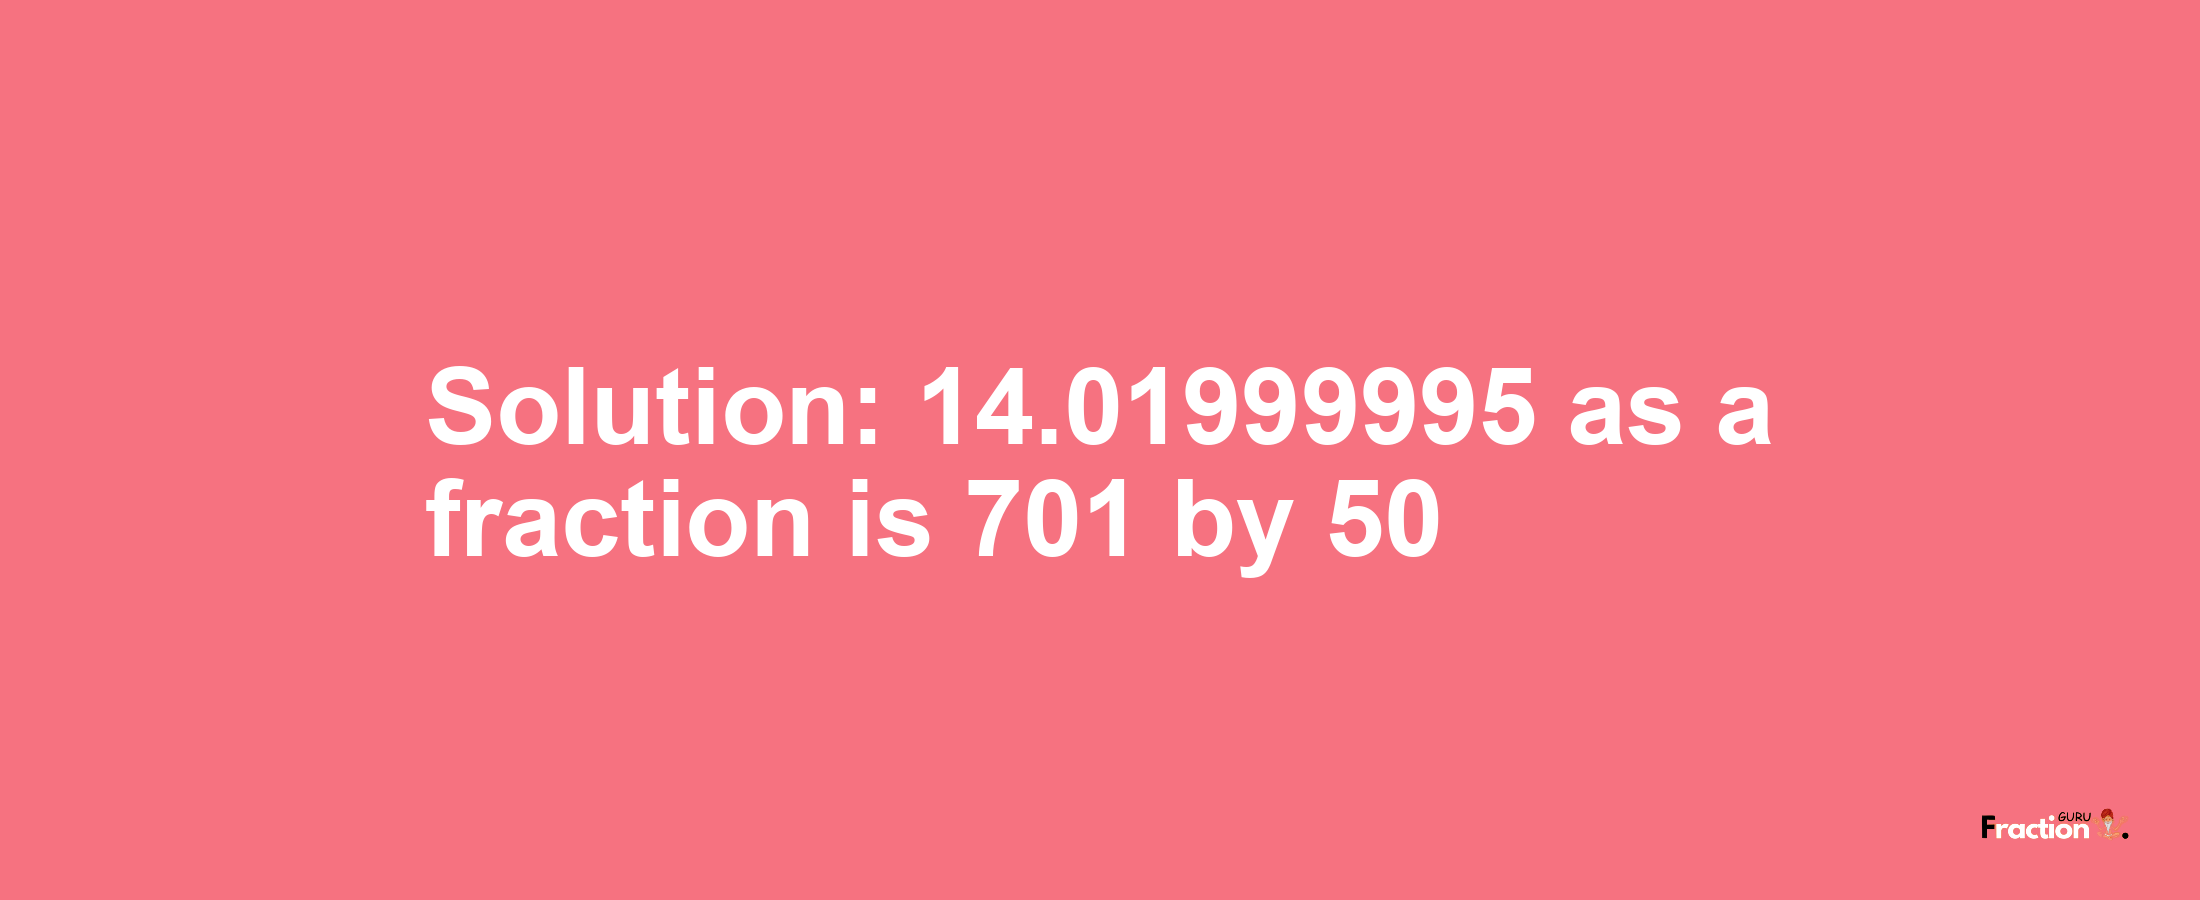 Solution:14.01999995 as a fraction is 701/50